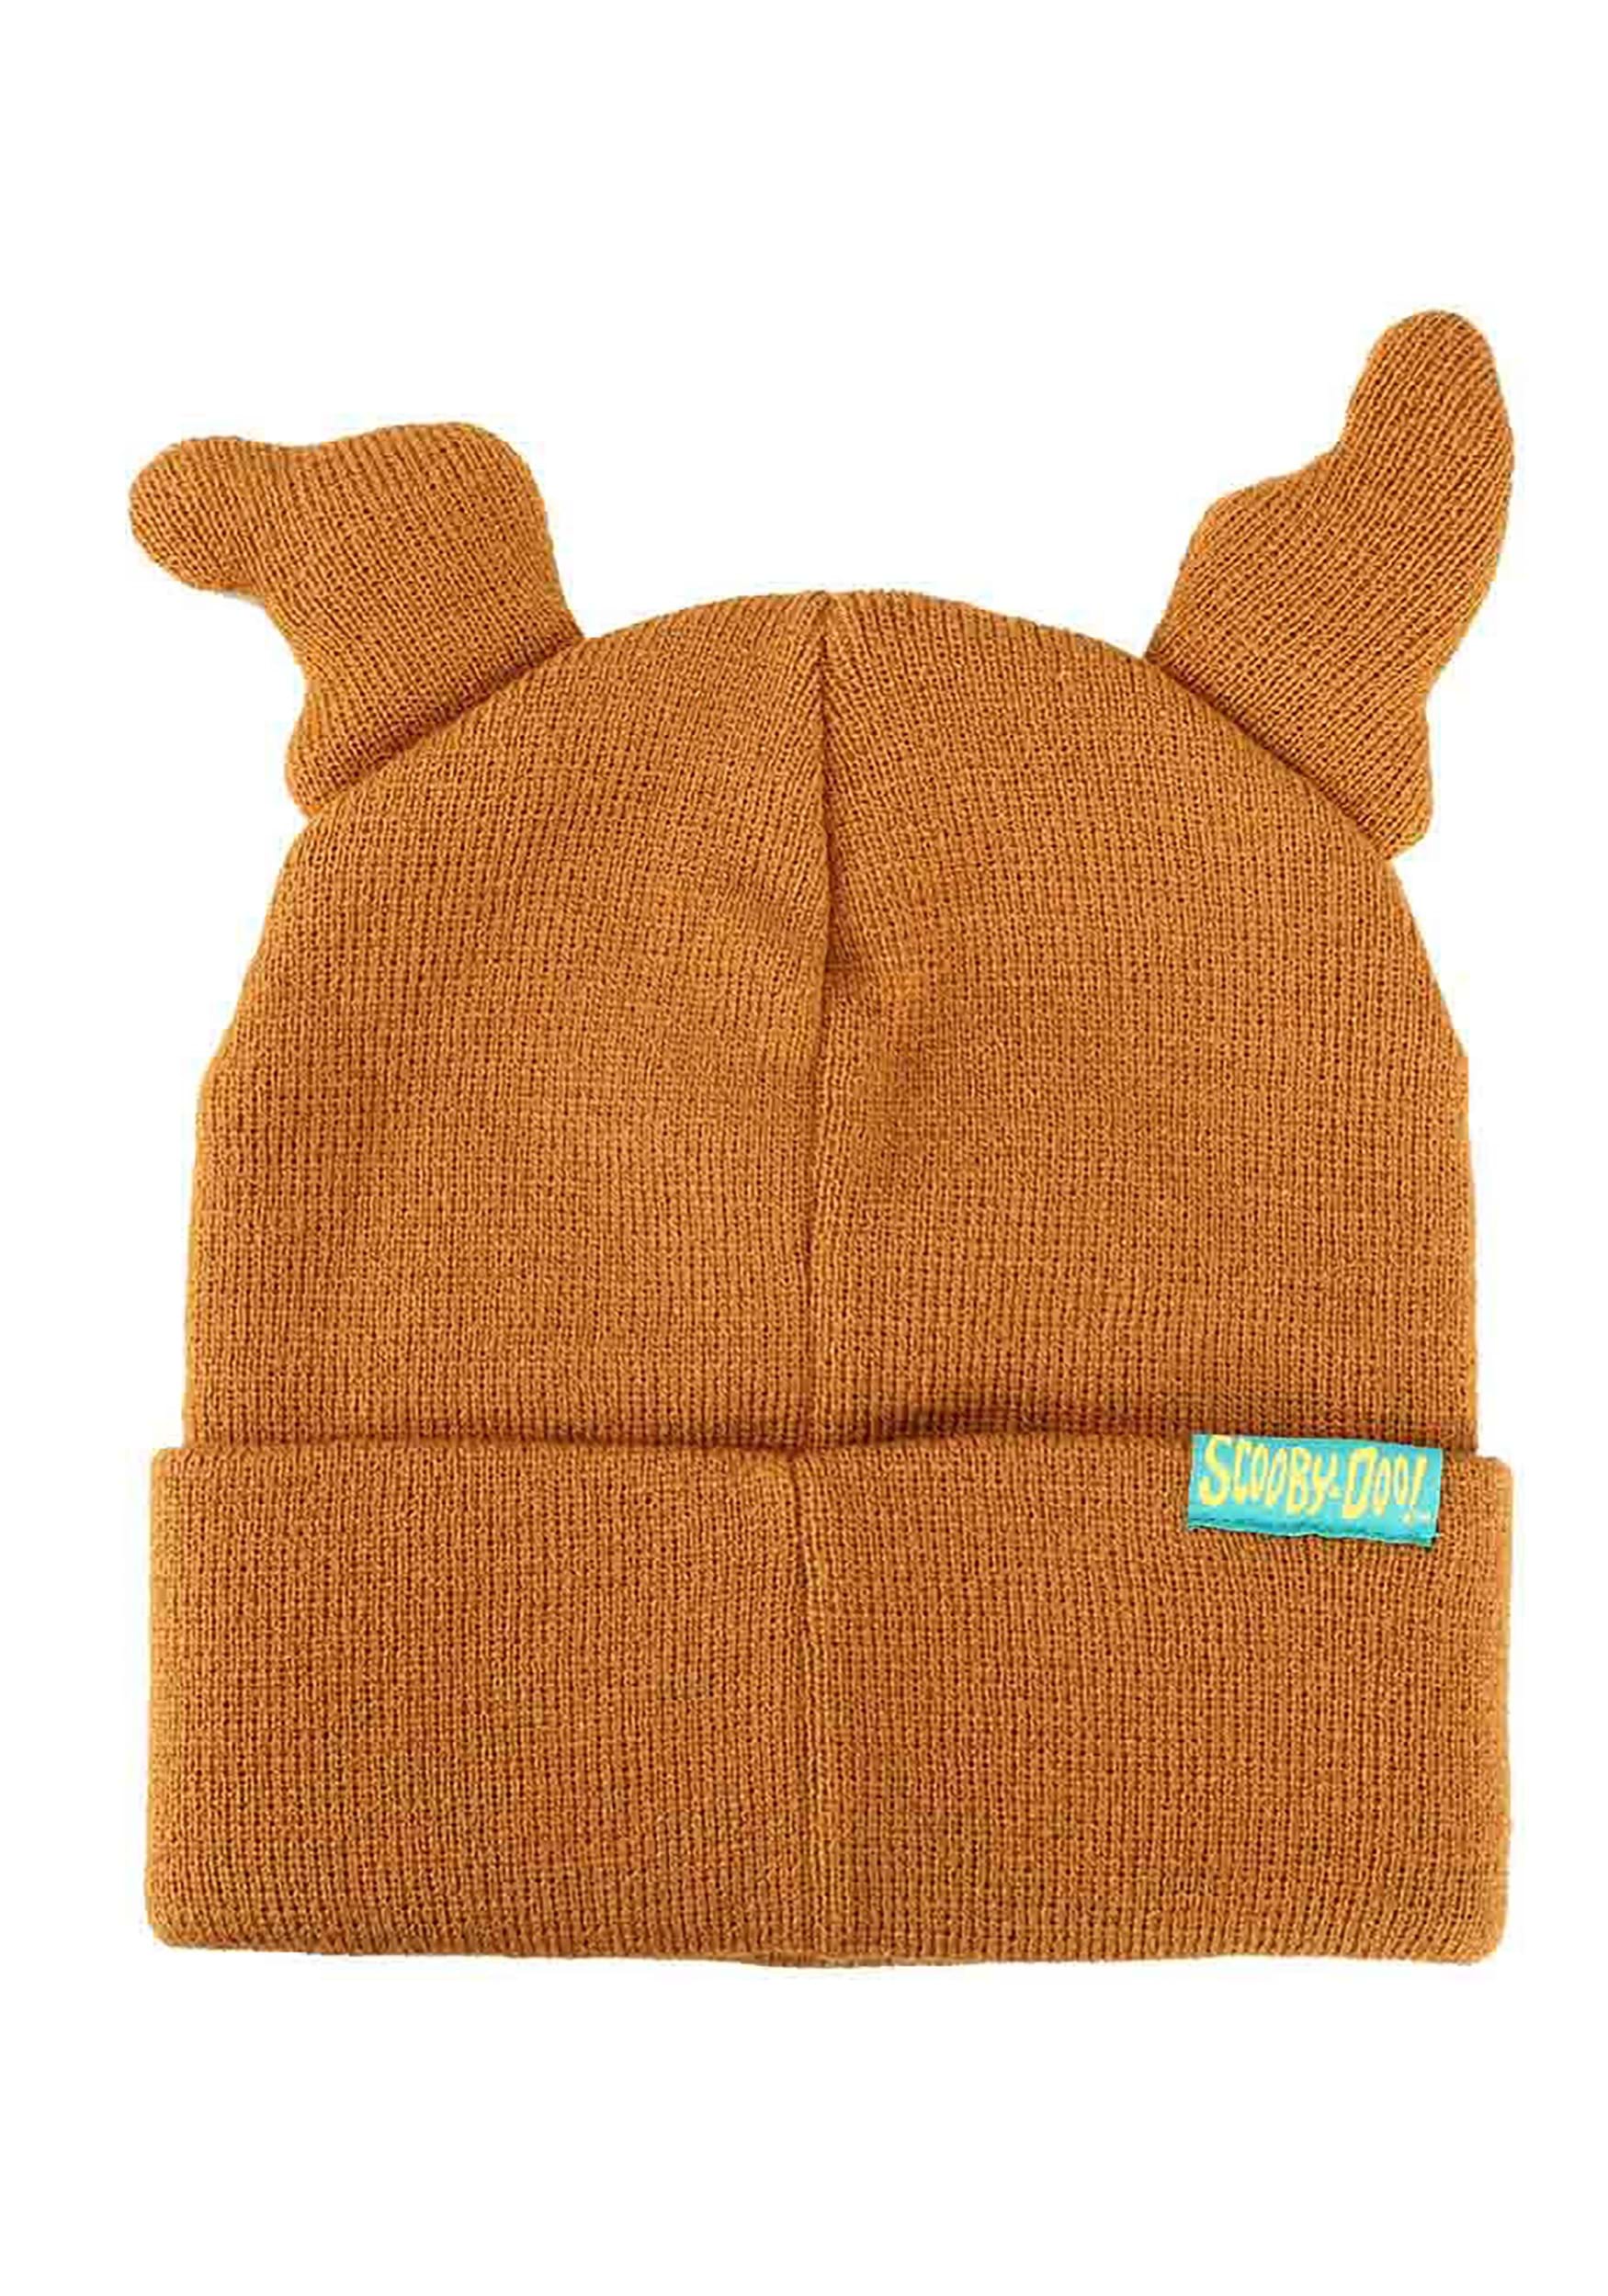 Scooby Doo 3D Plush Ears Embroidered Beanie